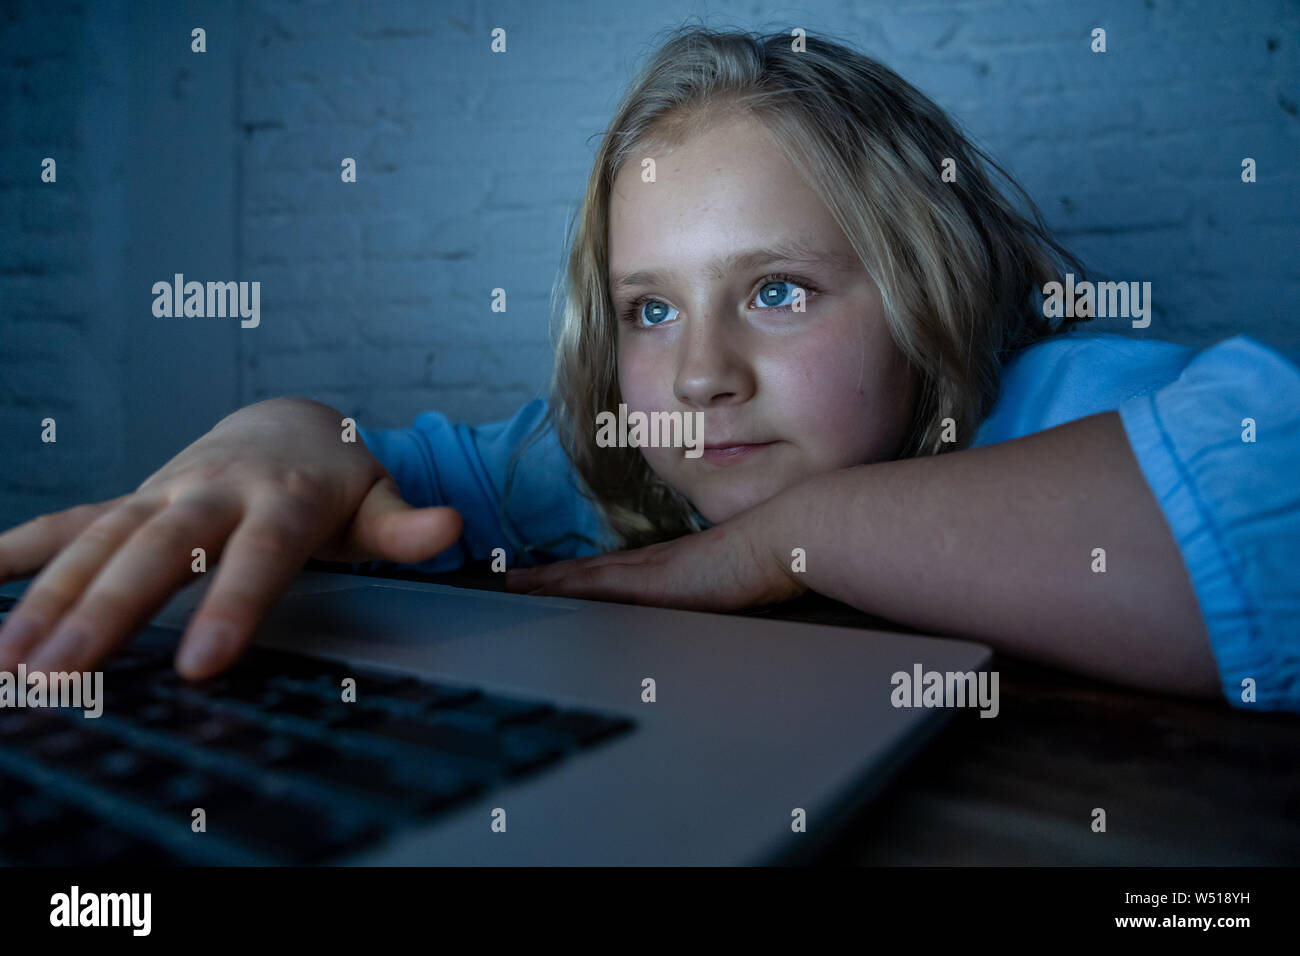 Cute schoolgirl child playing and surfing online late at night. Child addicted to internet games and social media can´t sleep hooked on laptop. Digita Stock Photo